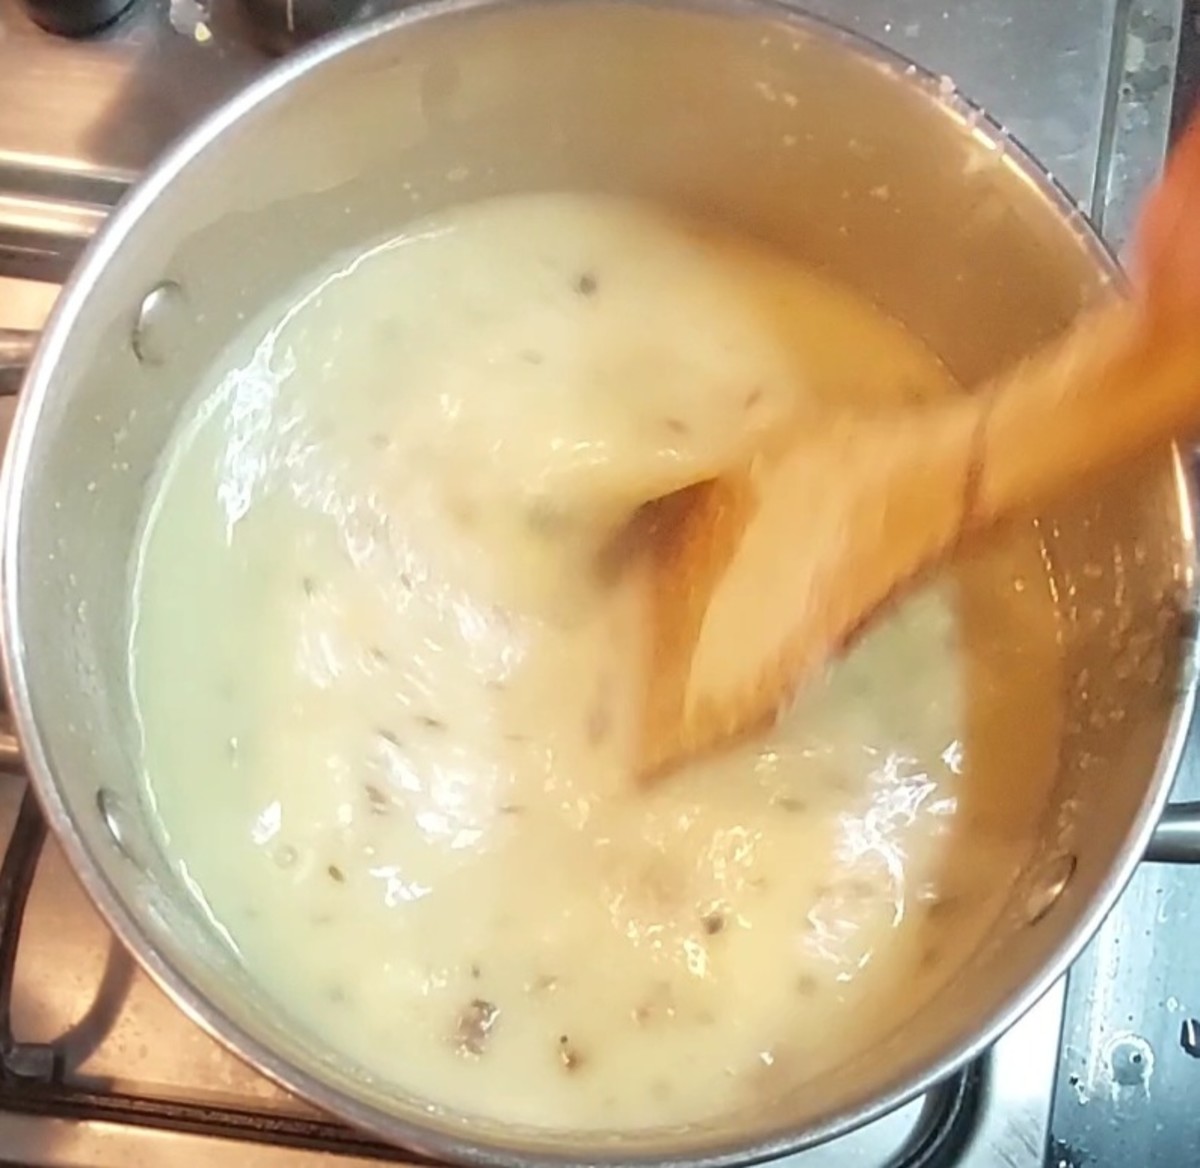 When the water is boiling, turn the flame to medium low; add raosted rava gradually. Stir quickly to avoid forming lumps. Mix well to break the lumps, if any. 